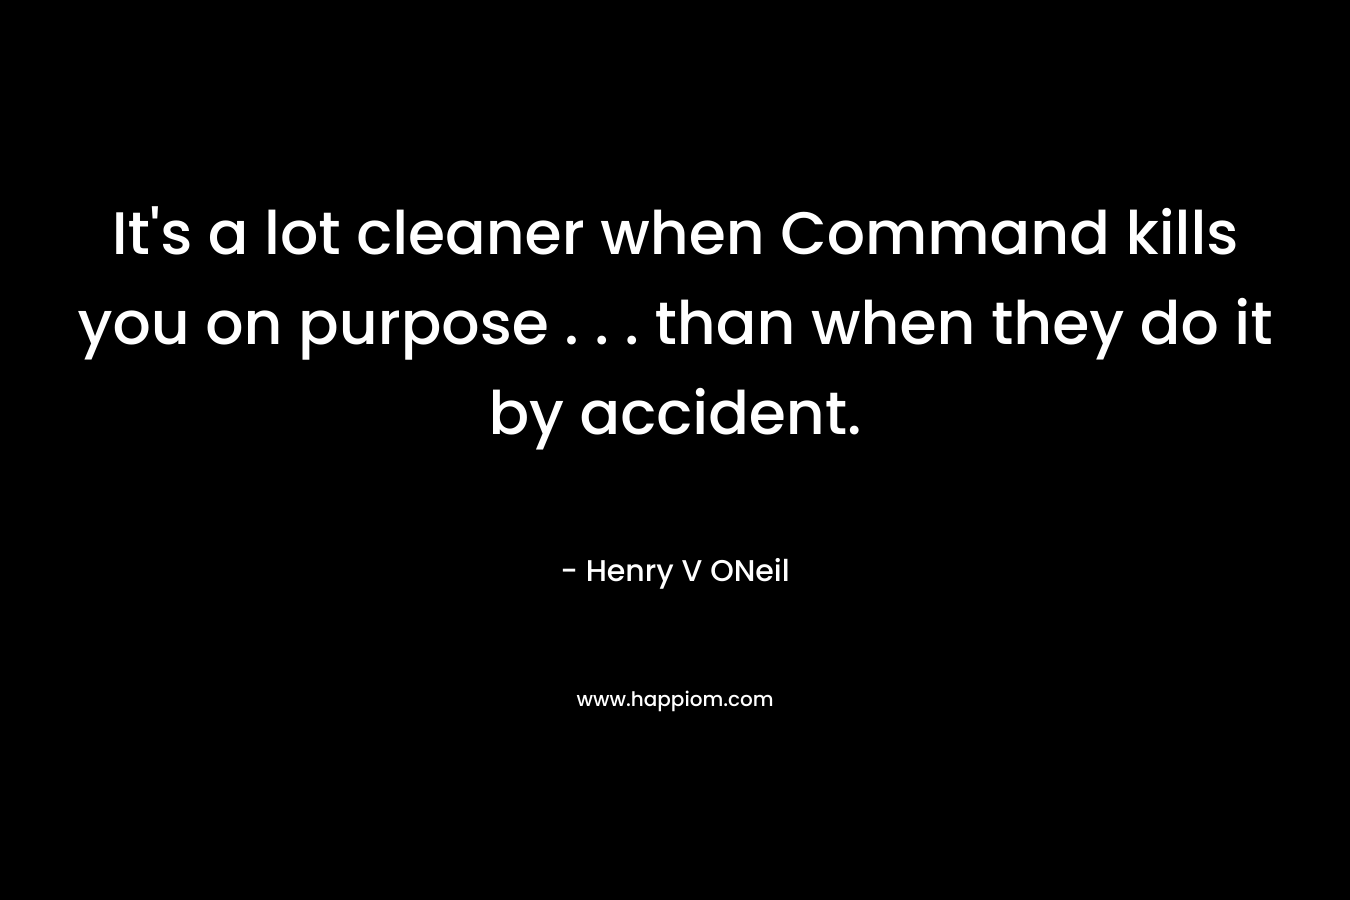 It’s a lot cleaner when Command kills you on purpose . . . than when they do it by accident. – Henry V ONeil